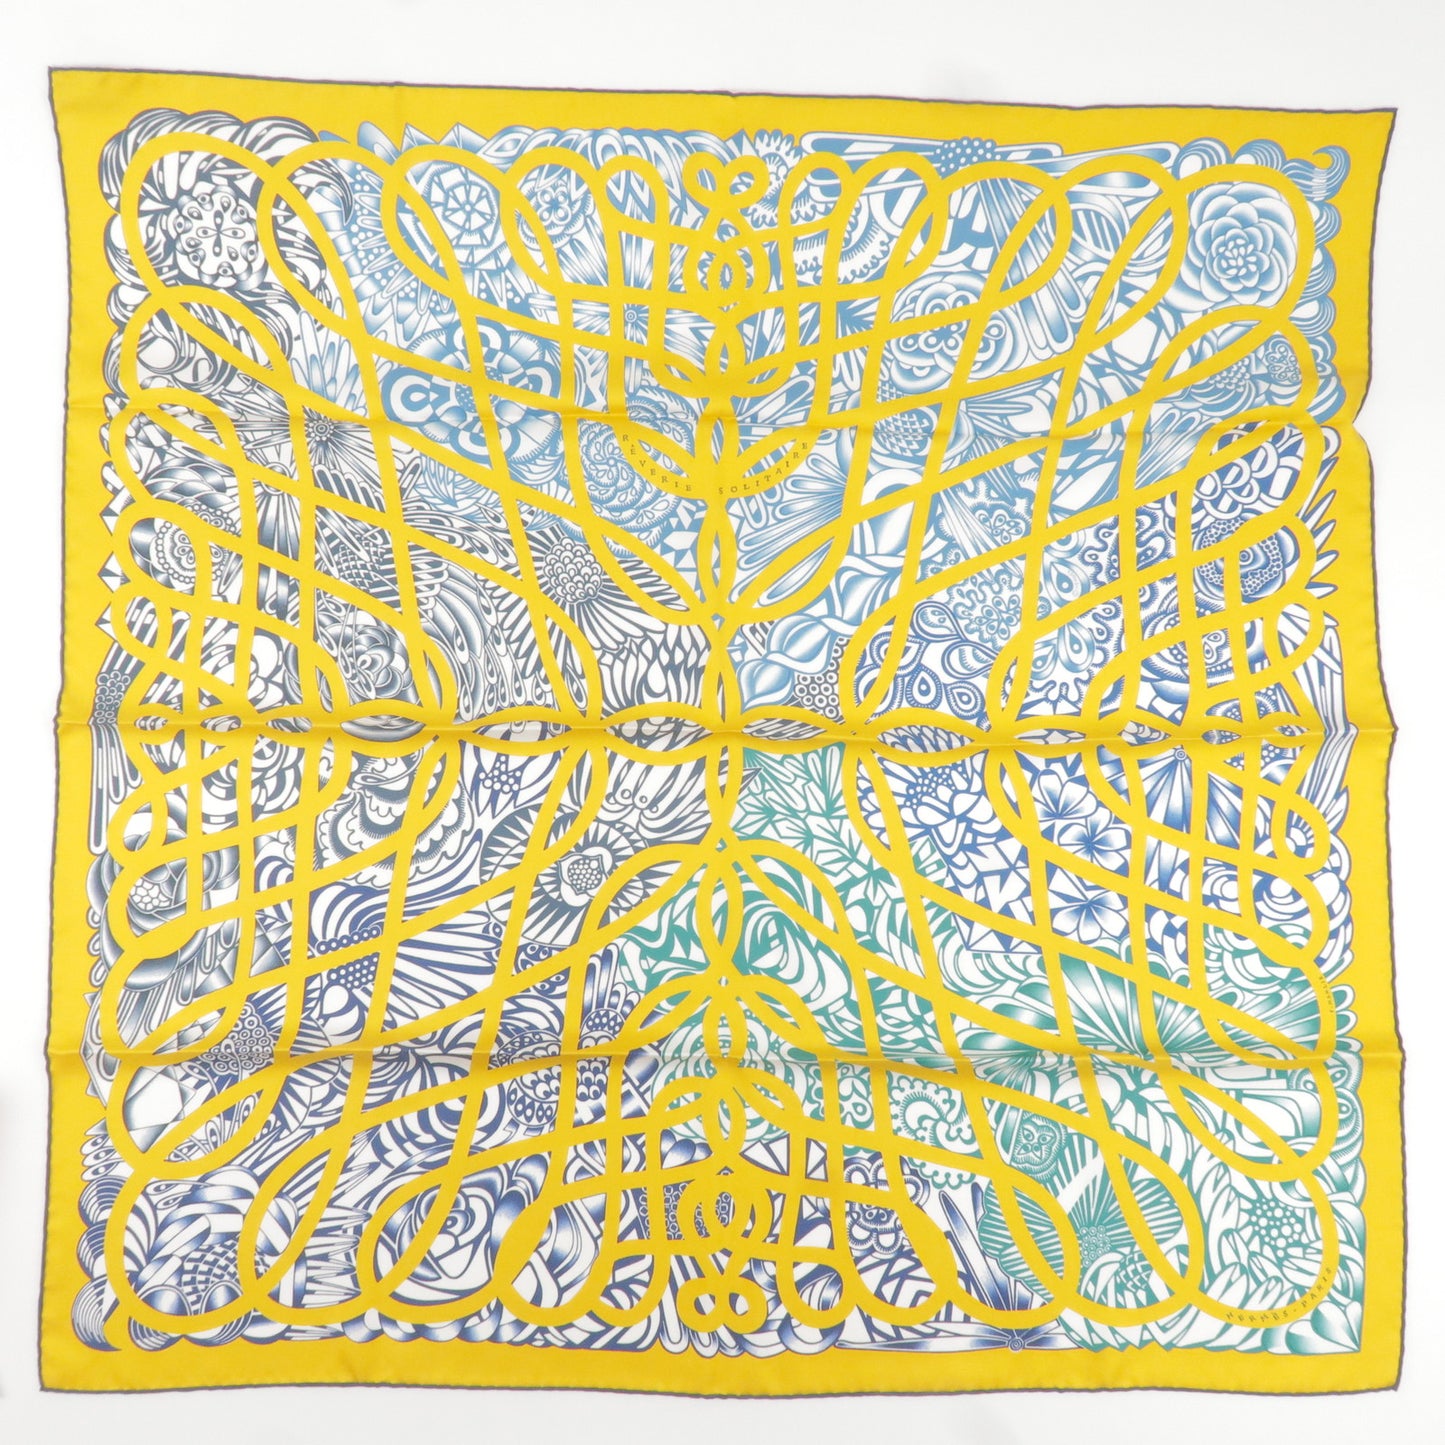 HERMES Carre 90 100% Silk Scarf Lonely Dream Yellow Navy